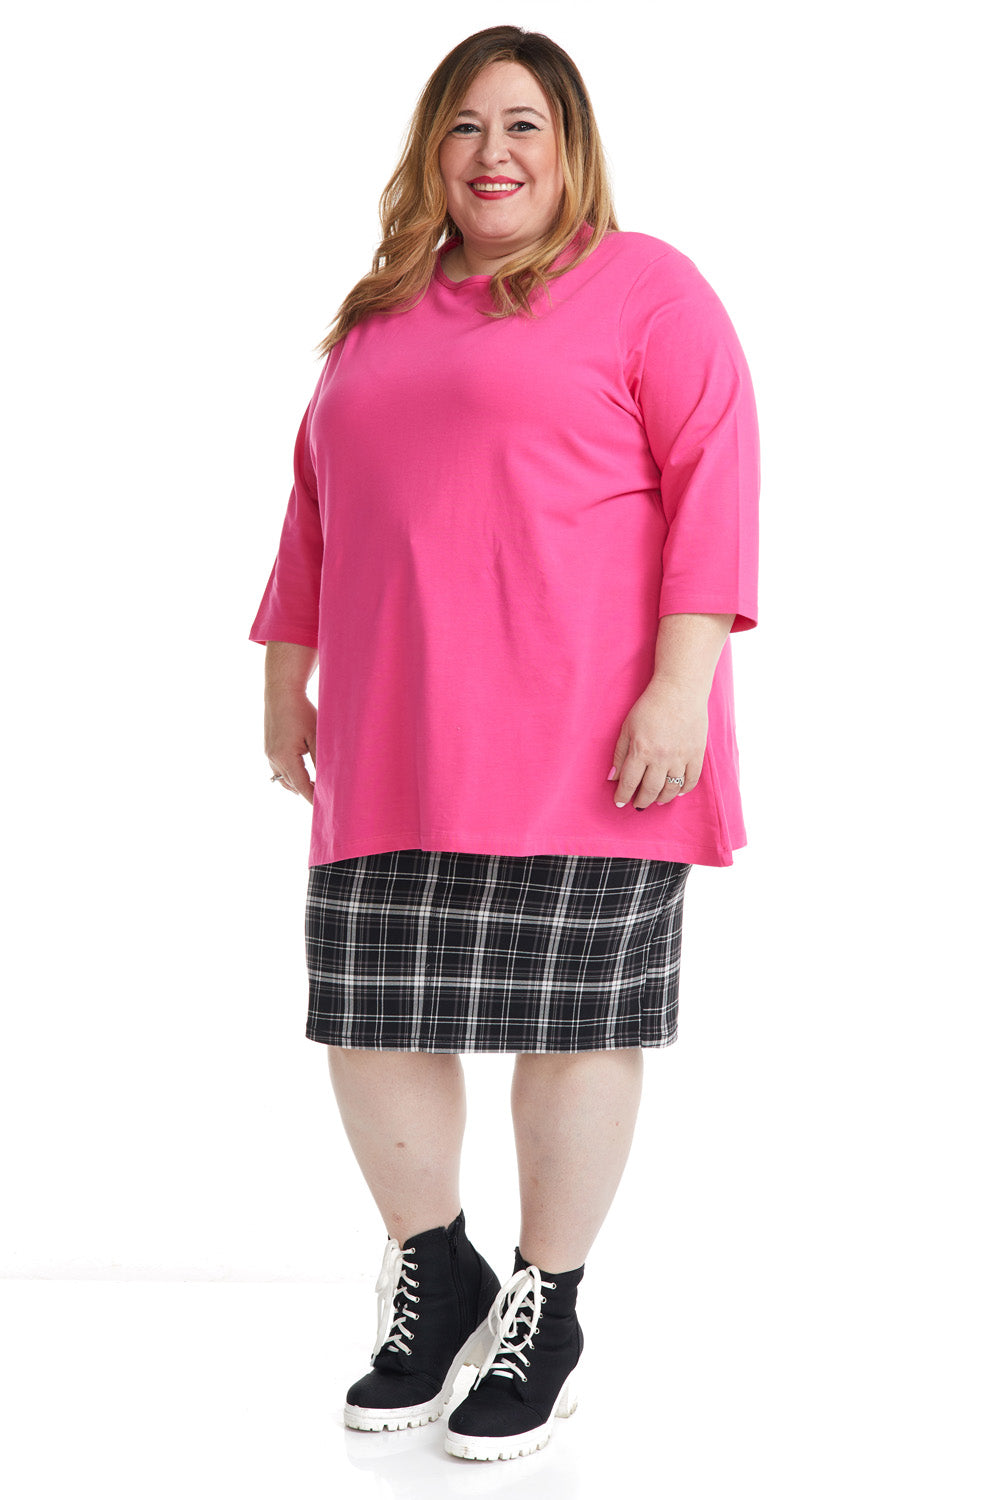 Casual Pink 3/4 sleeve baggy plus size t-shirt for women